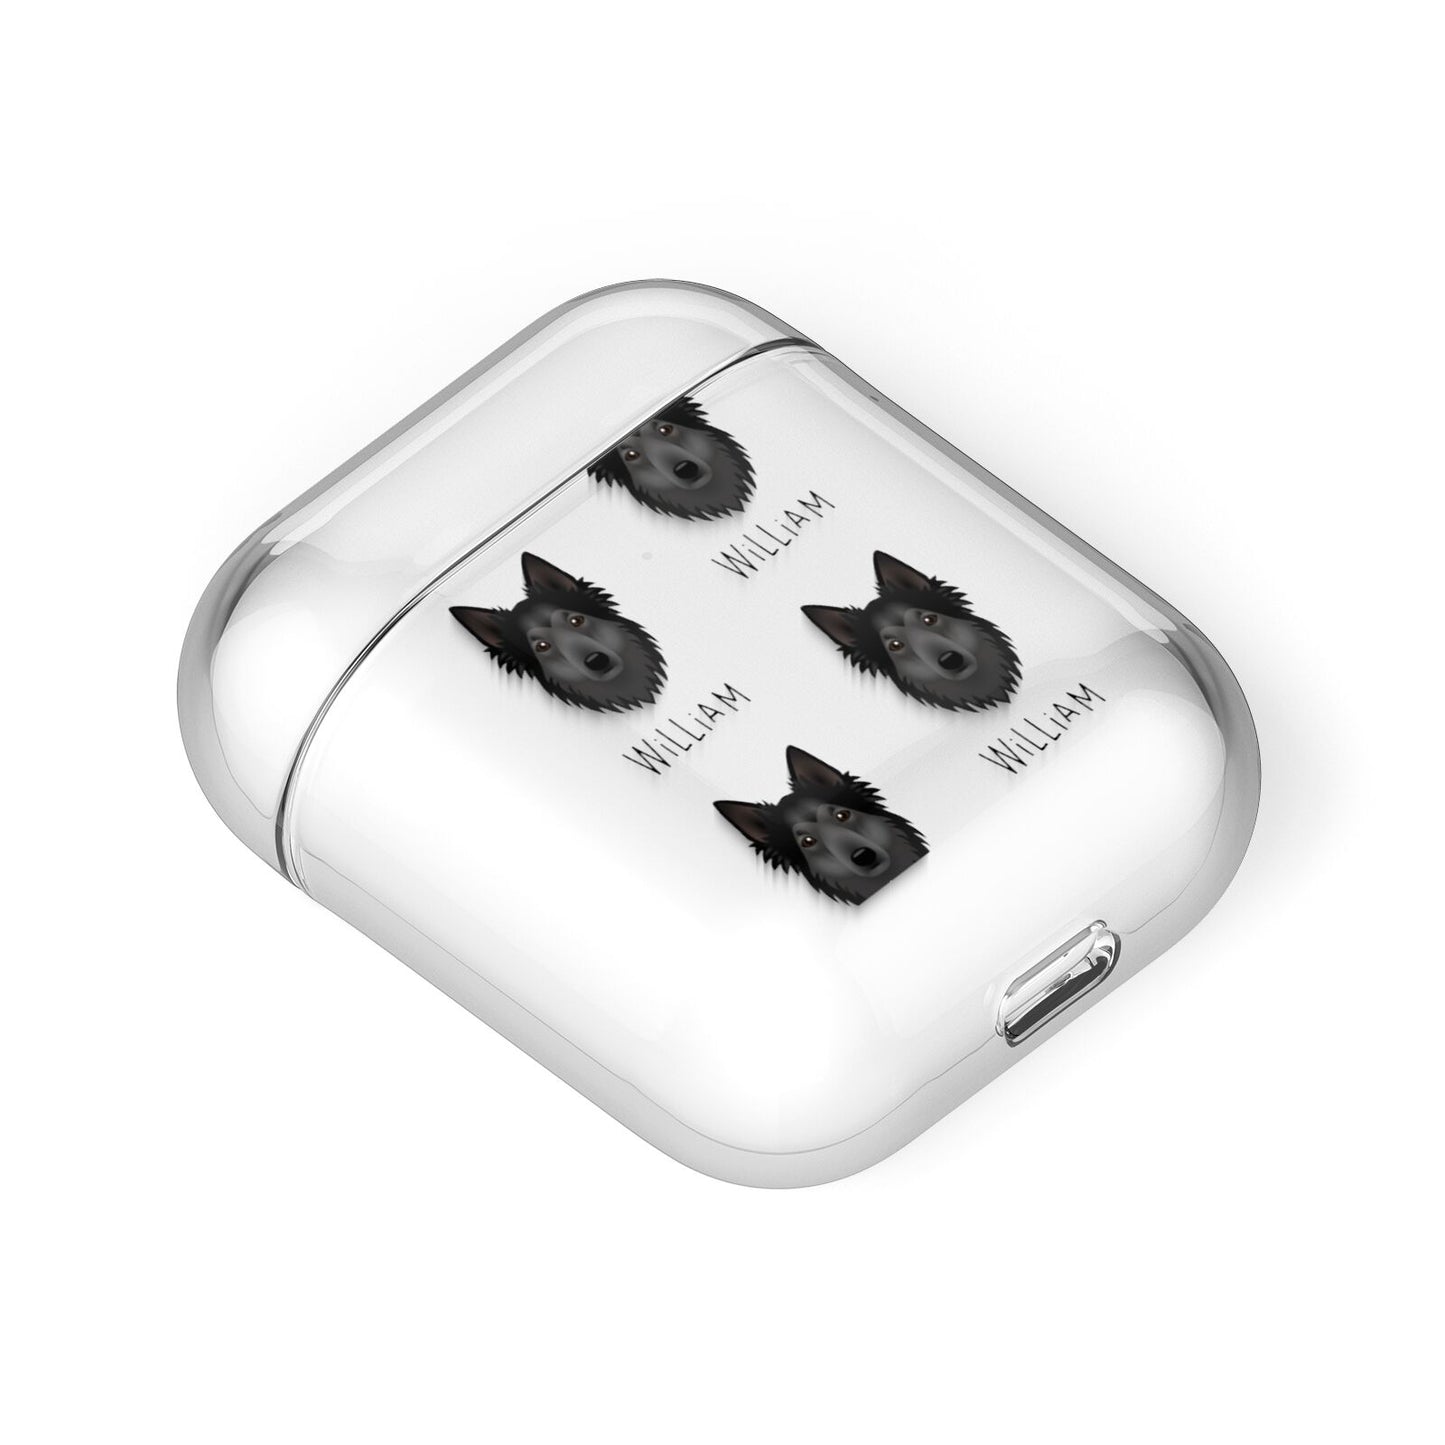 Shollie Icon with Name AirPods Case Laid Flat